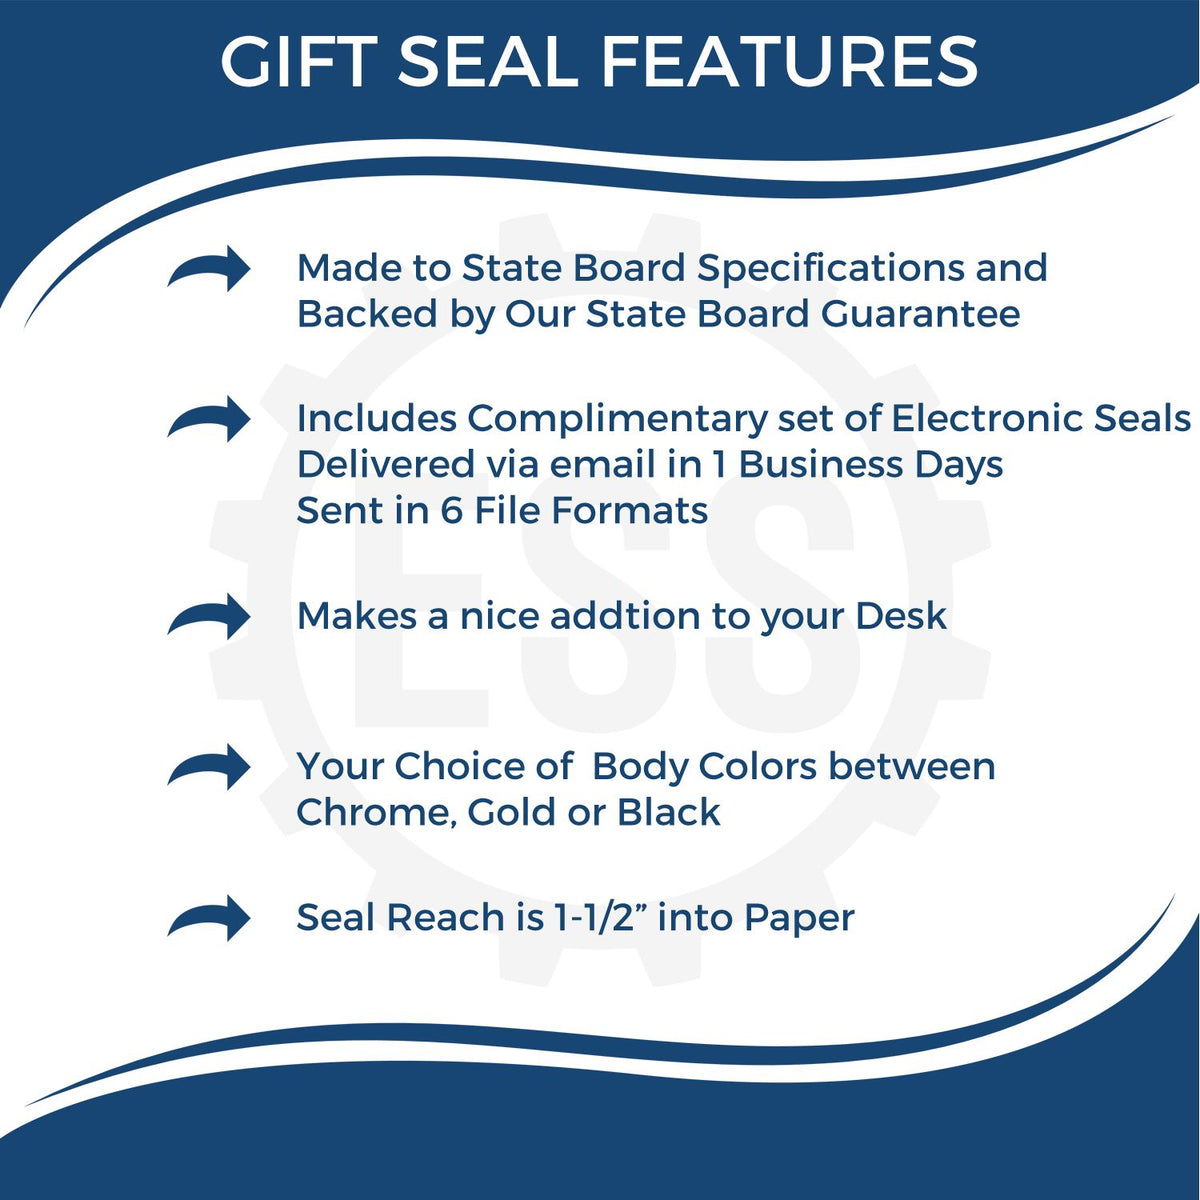 A picture of an infographic highlighting the selling points for the Gift Kentucky Architect Seal